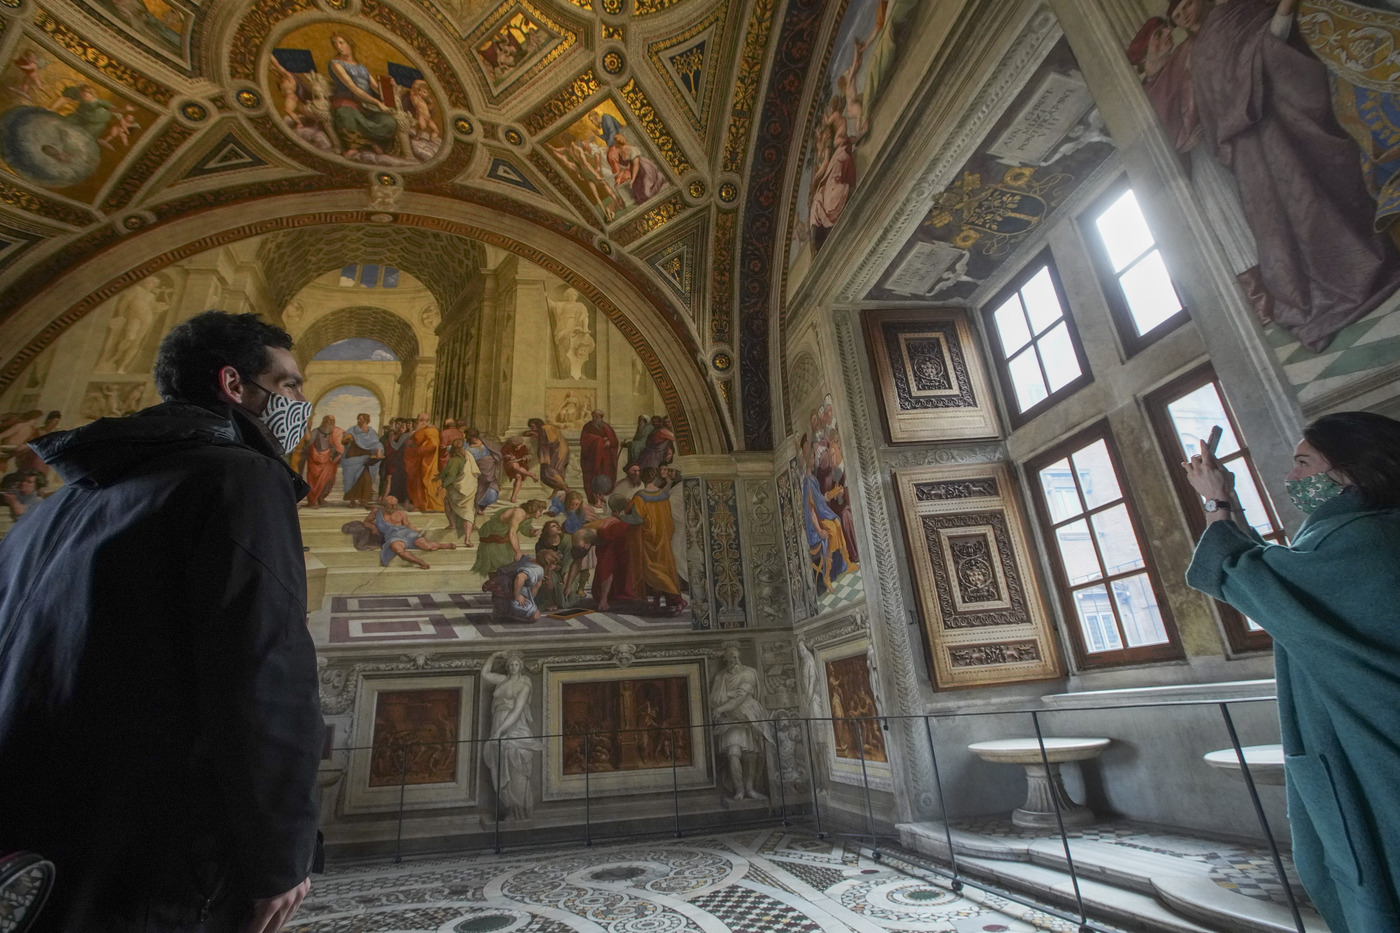 Visitors Julia Lammer from Austria, right, and Nico Epstein from Canada admire the frescoes of one the Raphael rooms at the Vatican Museums Monday, Feb. 1, 2021. The Vatican Museums reopened Monday to visitors after 88 days of shutdown following COVID-19 containment measures. (AP Photo/Andrew Medichini)